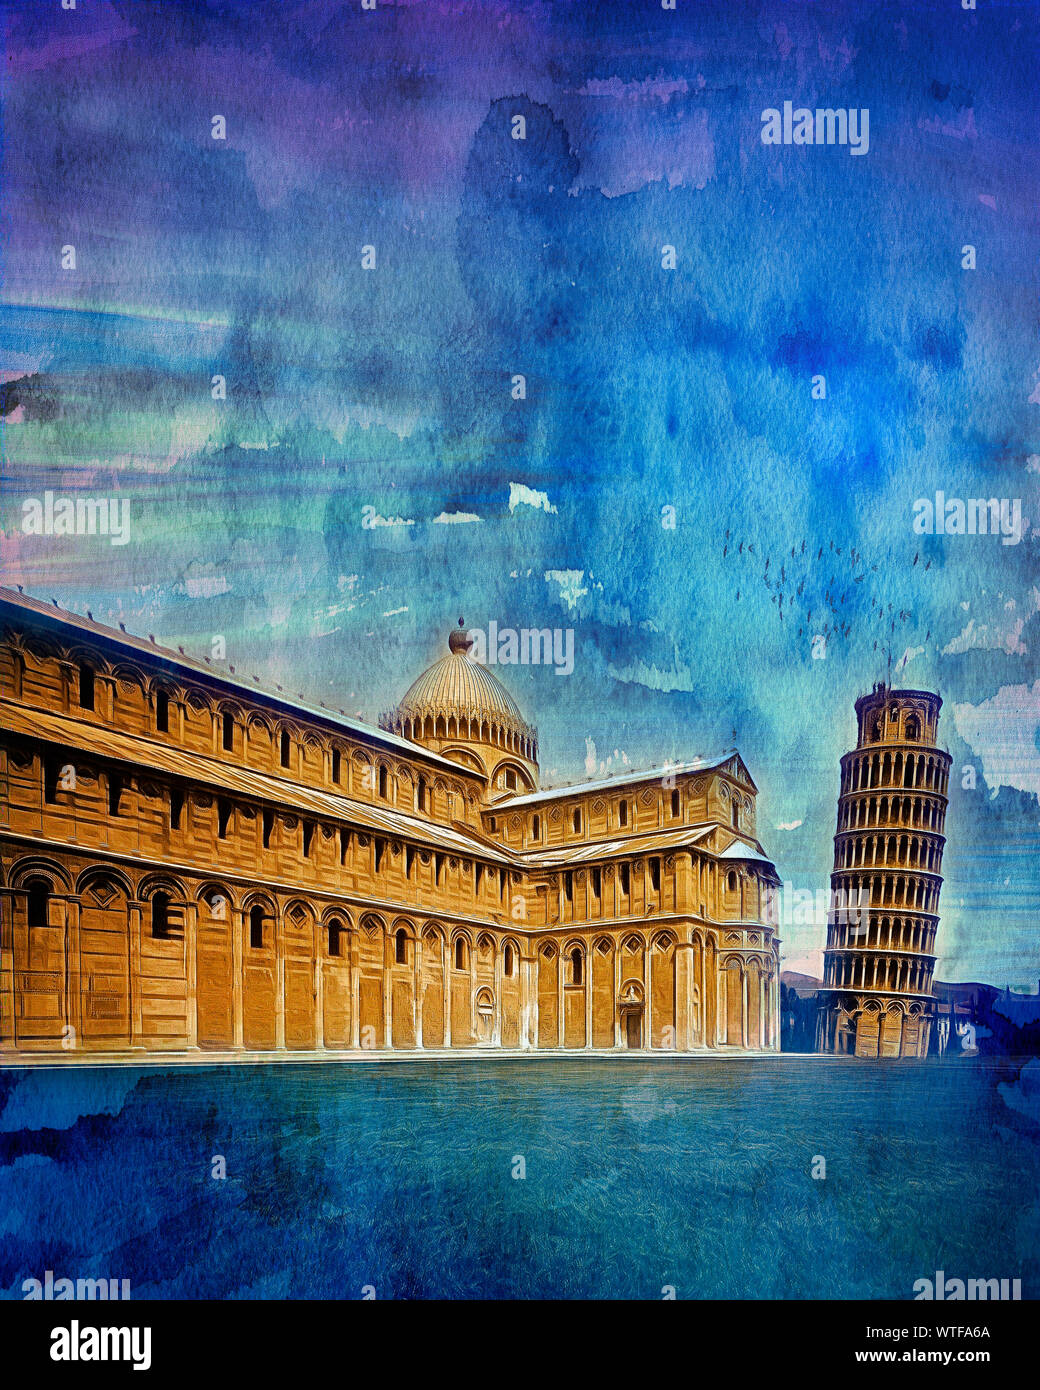 DIGITAL ART: The Leaning Tower at Pisa in Tuscany, Italy Stock Photo